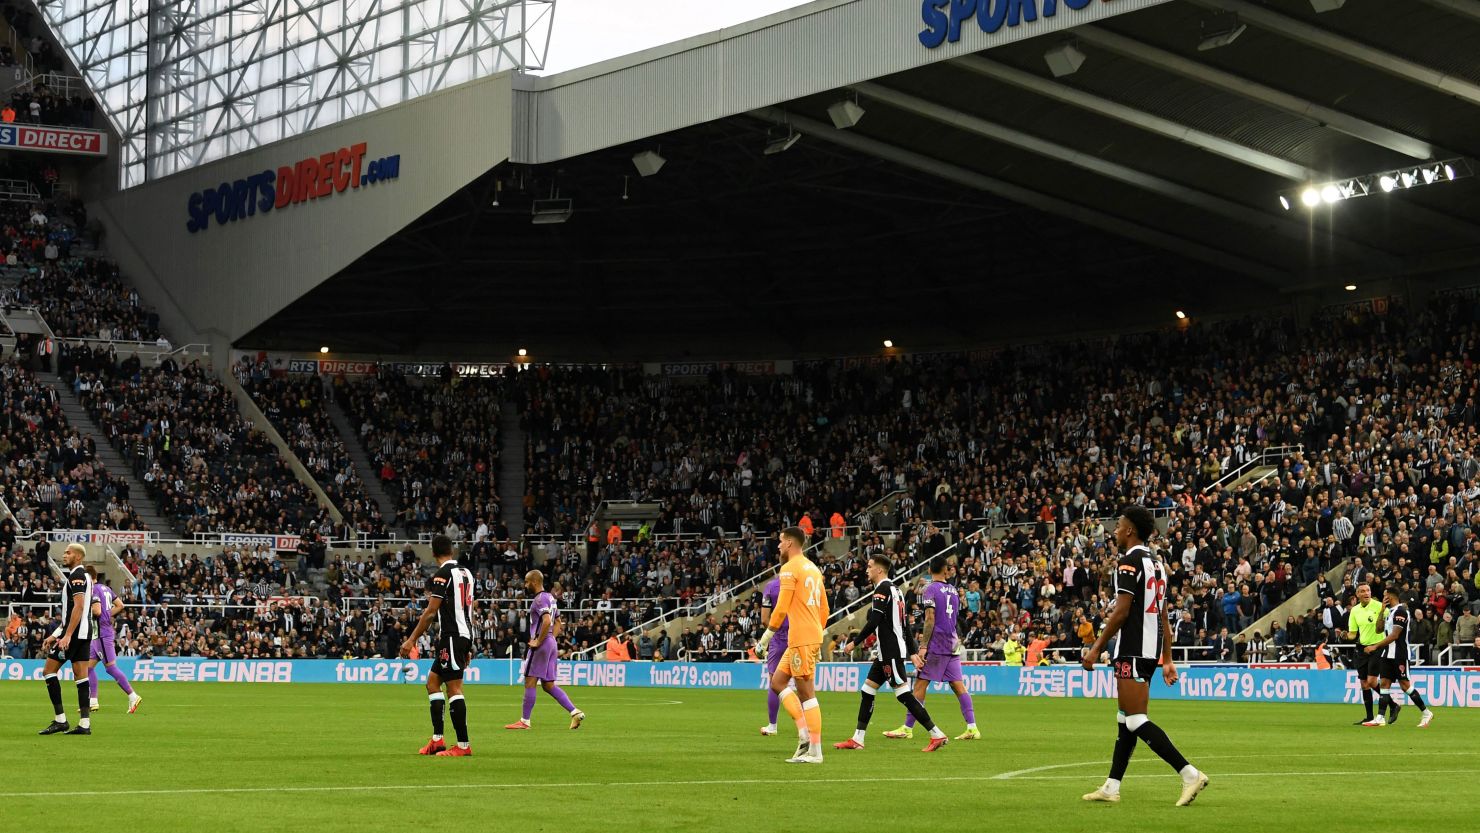 Players leave the pitch after a medical emergency in the crowd stops play shortly before half time during the Premier League match between Newcastle United and Tottenham Hotspur at St James' Park.